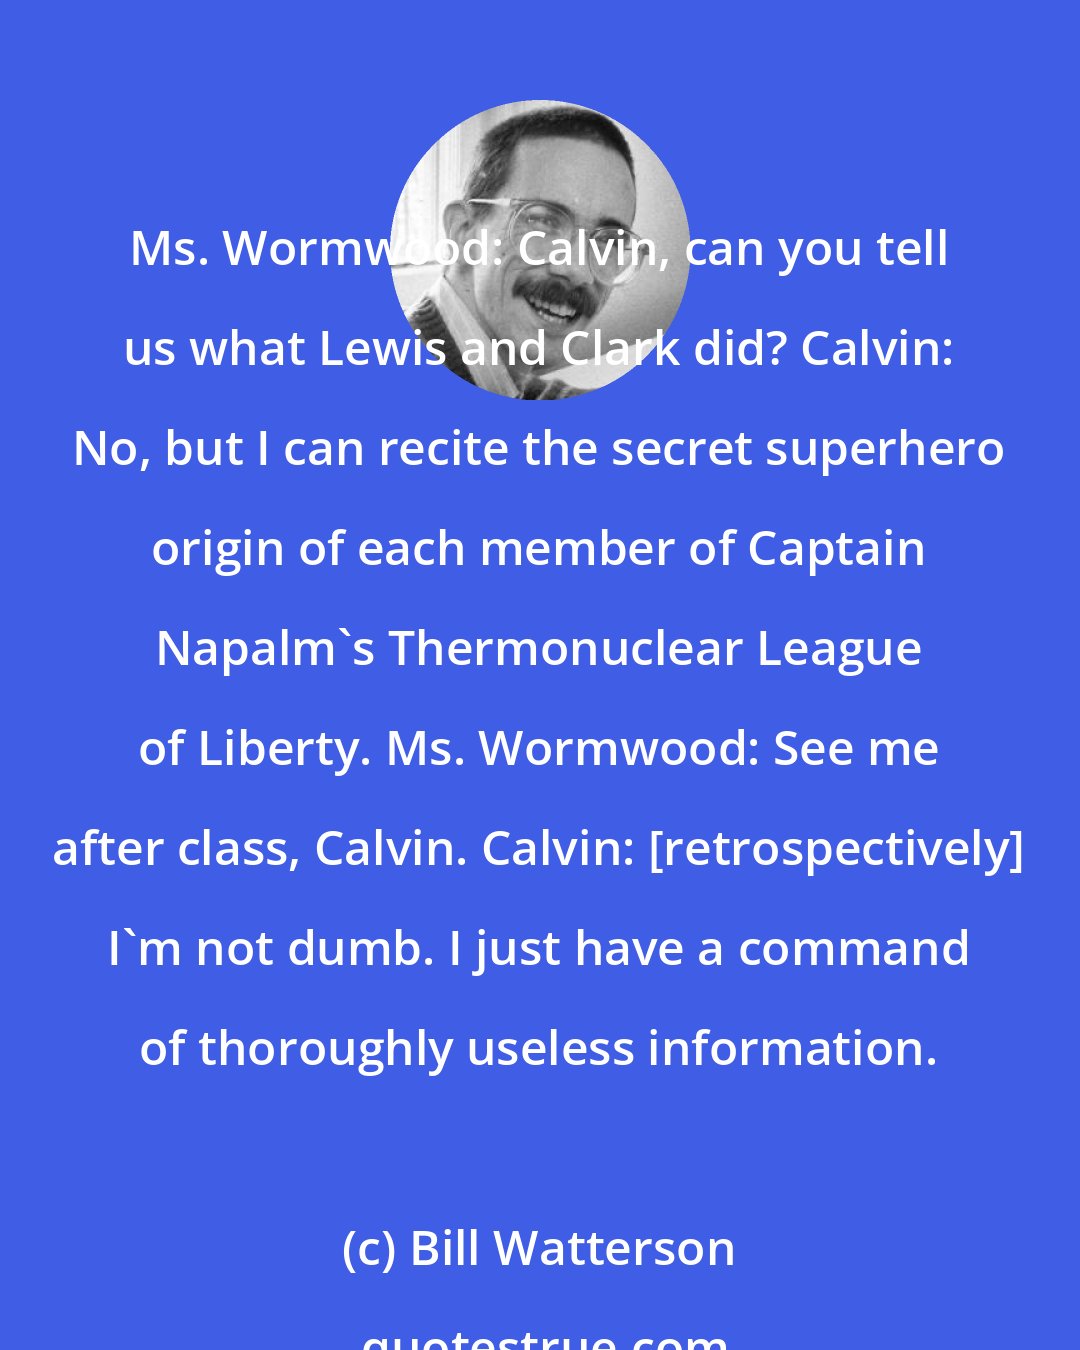 Bill Watterson: Ms. Wormwood: Calvin, can you tell us what Lewis and Clark did? Calvin: No, but I can recite the secret superhero origin of each member of Captain Napalm's Thermonuclear League of Liberty. Ms. Wormwood: See me after class, Calvin. Calvin: [retrospectively] I'm not dumb. I just have a command of thoroughly useless information.